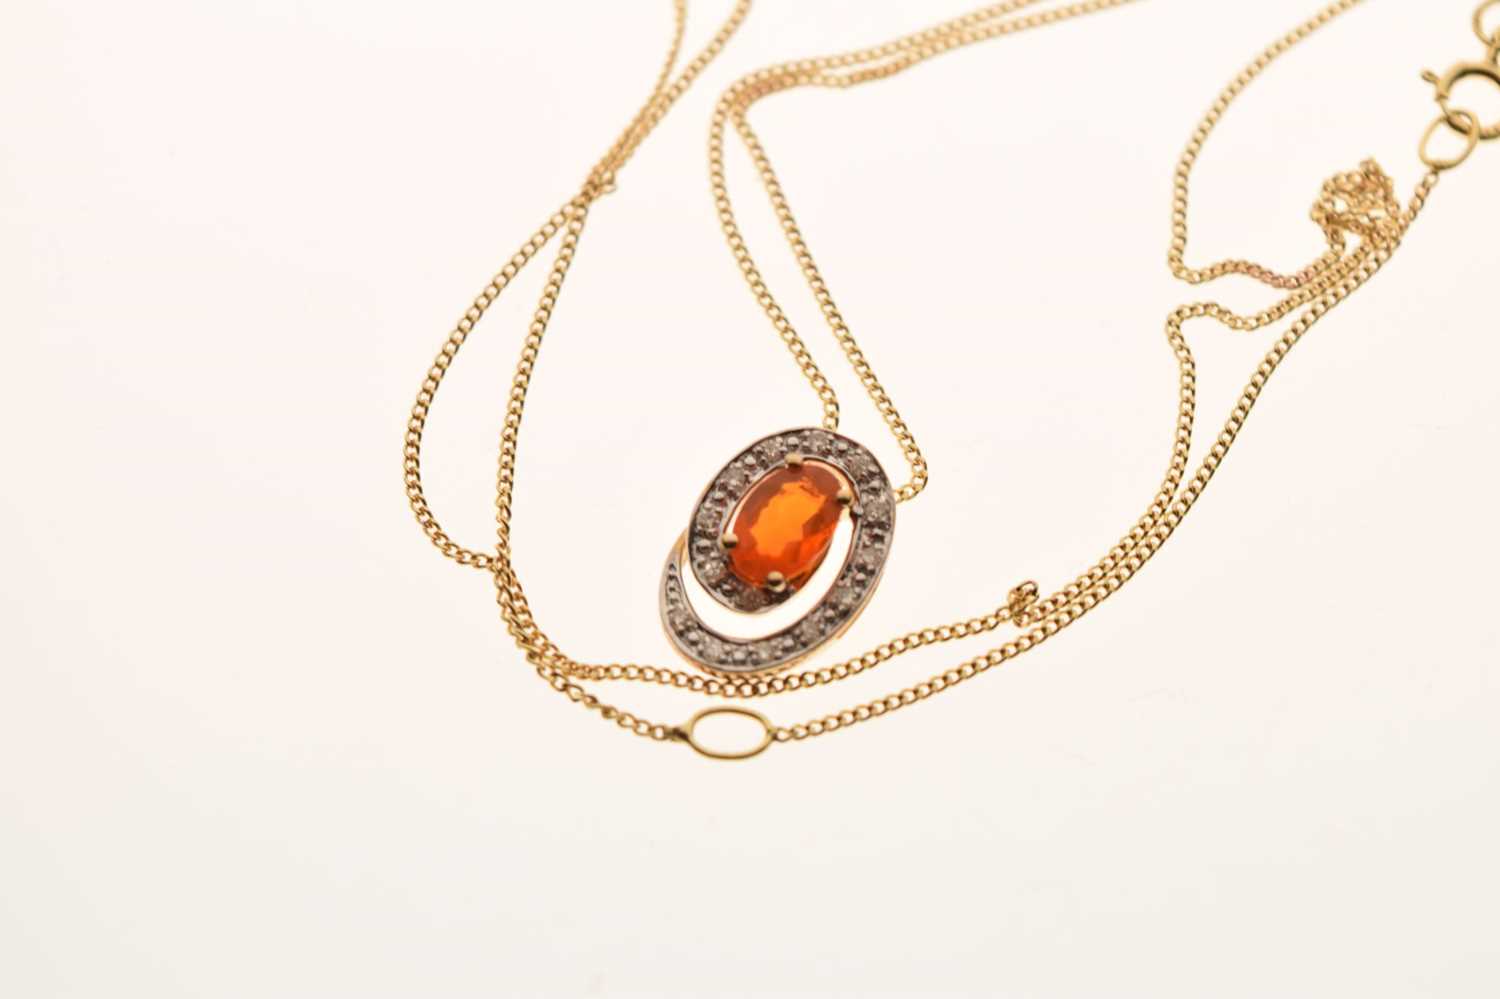 9ct gold fire opal pendant and earring set - Image 9 of 11